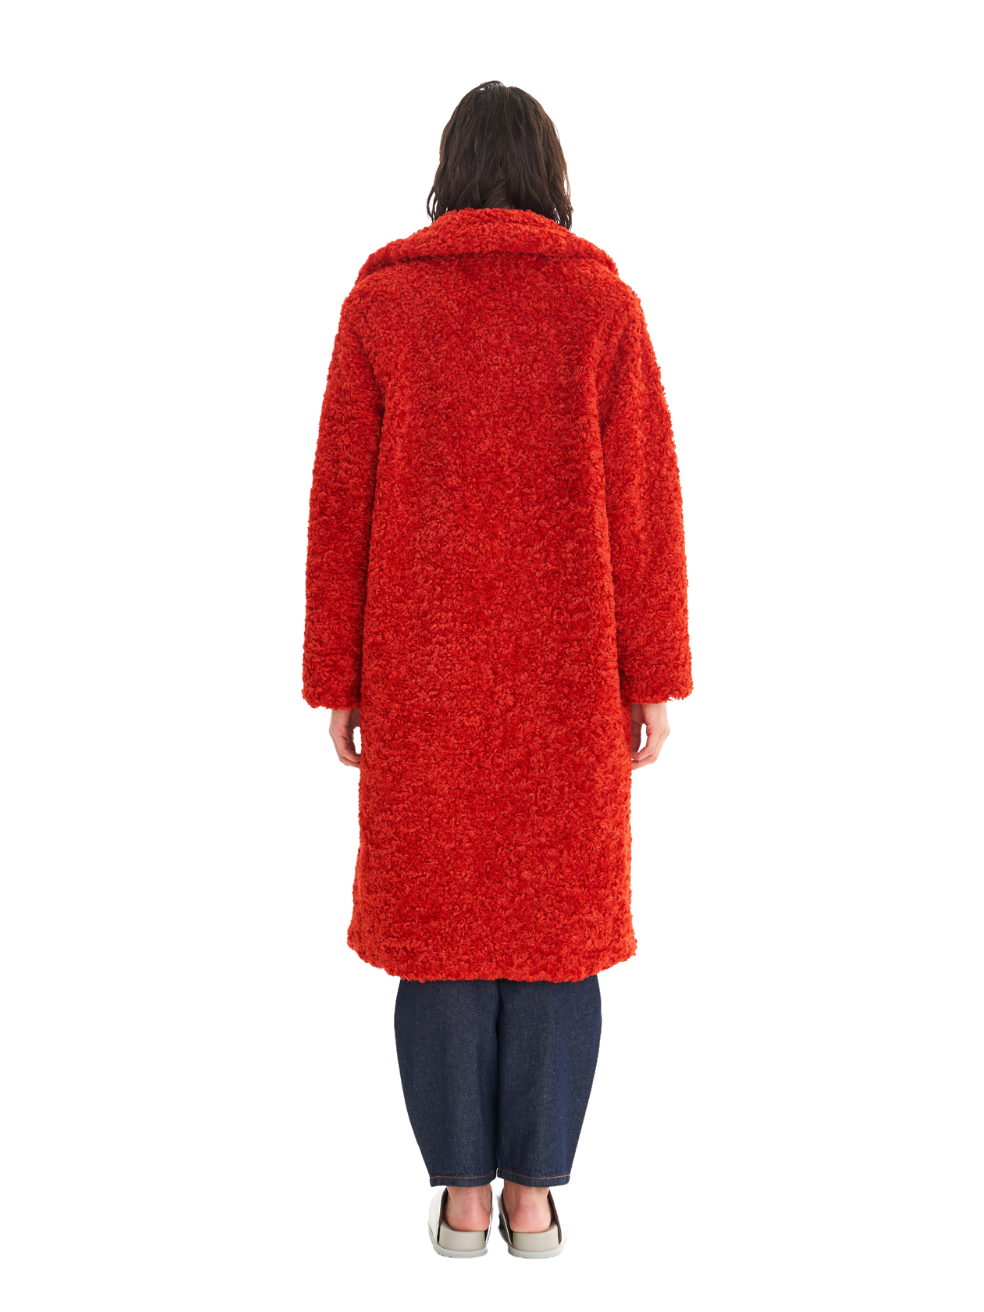 Ruby Bright Red Sustainable Luxury Fashion Faux Sherpa Teddy Coat